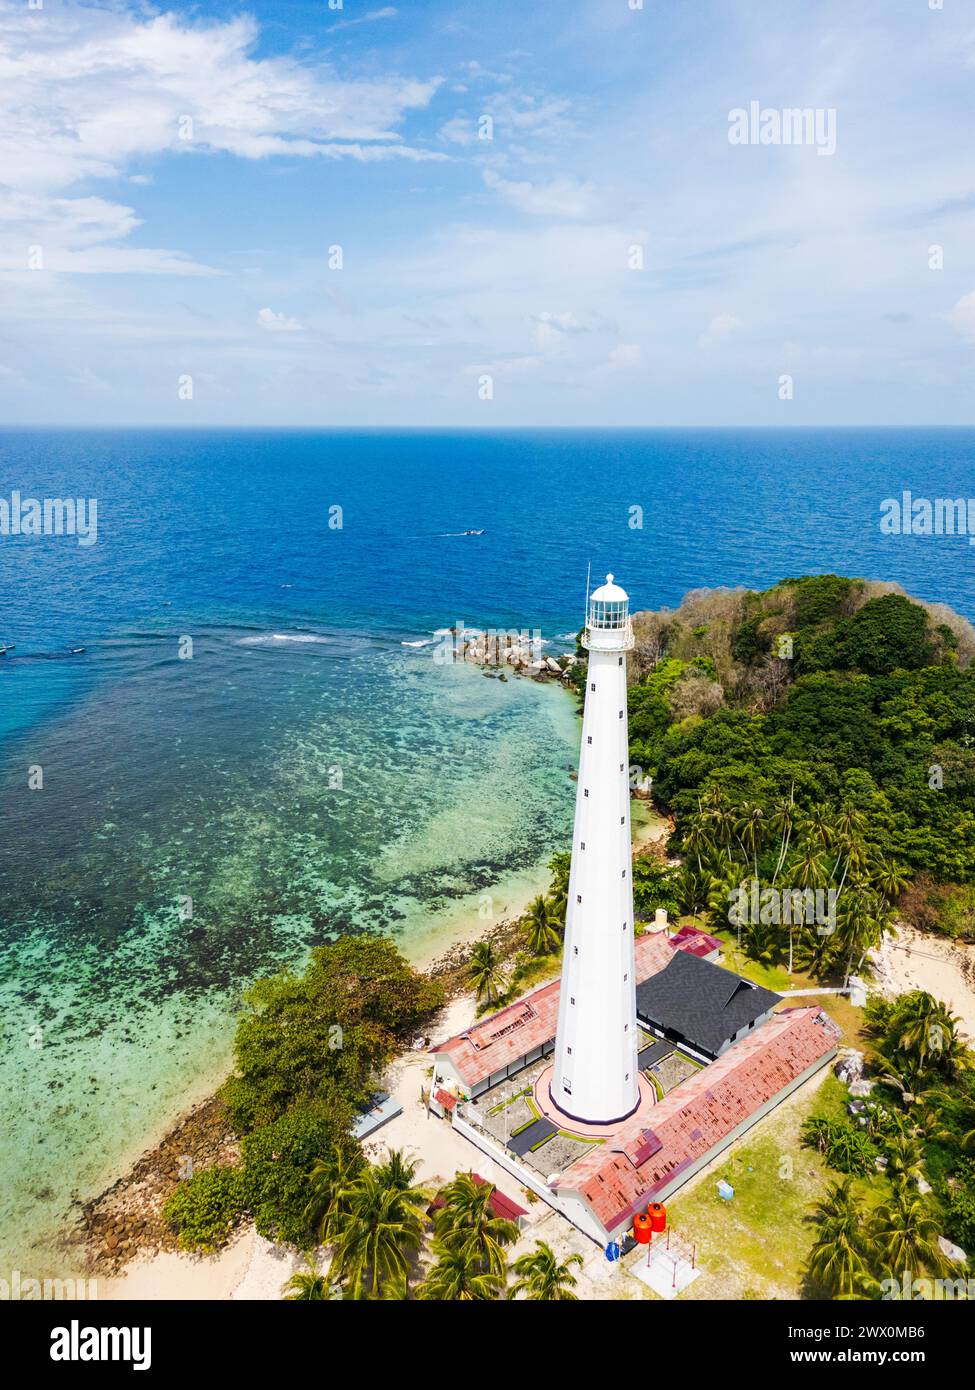 Belitung beach and islands drone view with Lengkuas Island lighthouse. Beautiful aerial view of islands, boat, sea and rocks in Belitung, Indonesia  Stock Photo